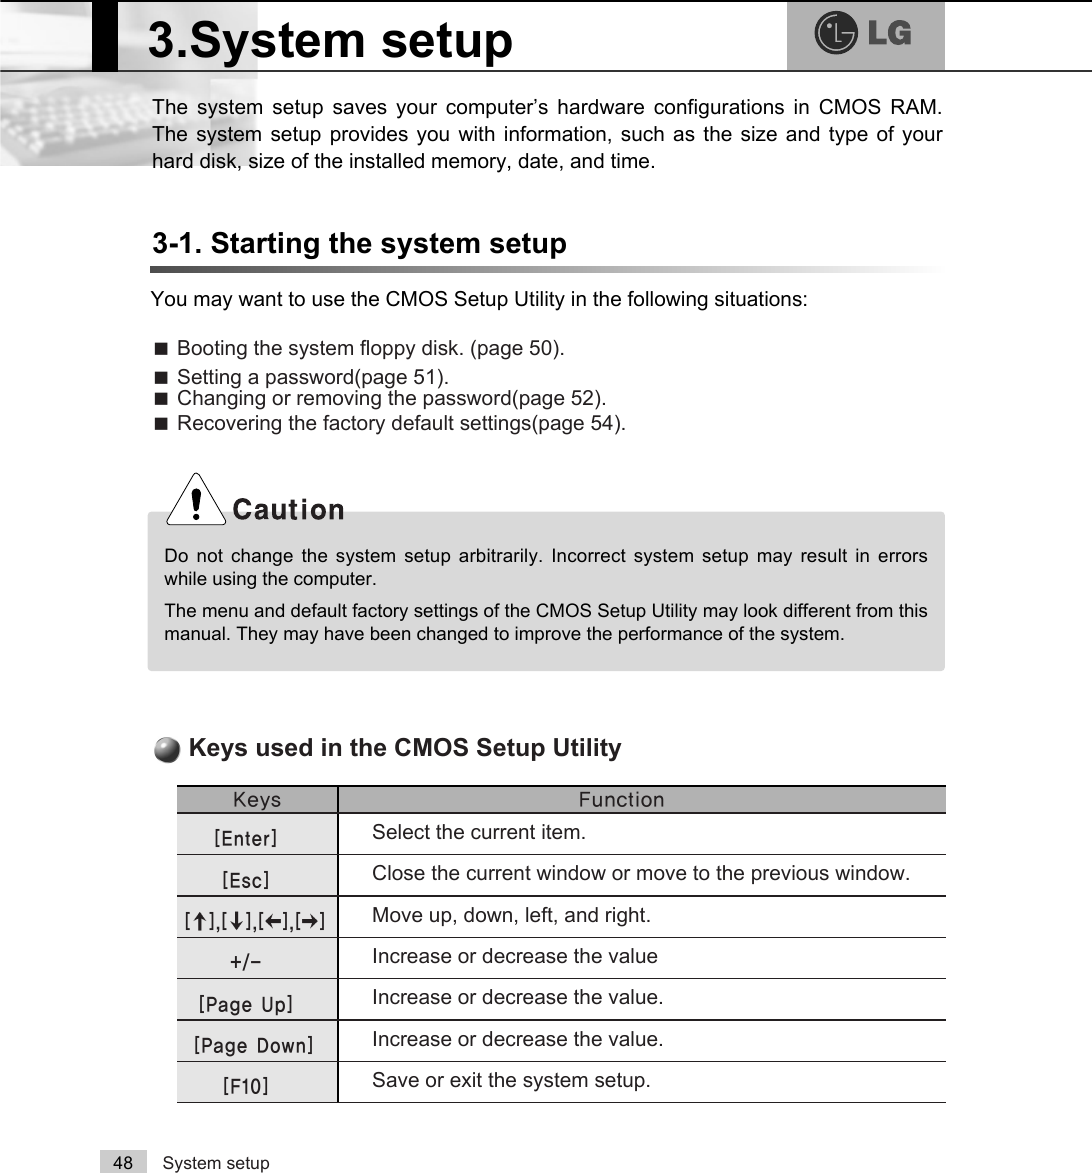 System setup48The system setup saves your computer’s hardware configurations in CMOS RAM.The system setup provides you with information, such as the size and type of yourhard disk, size of the installed memory, date, and time.3-1. Starting the system setupYou may want to use the CMOS Setup Utility in the following situations:ãBooting the system floppy disk. (page 50).ãSetting a password(page 51).ãChanging or removing the password(page 52).ãRecovering the factory default settings(page 54).Do not change the system setup arbitrarily. Incorrect system setup may result in errorswhile using the computer.The menu and default factory settings of the CMOS Setup Utility may look different from thismanual. They may have been changed to improve the performance of the system..H\V )XQFWLRQSelect the current item.&gt;(QWHU@Close the current window or move to the previous window.&gt;(VF@Move up, down, left, and right.&gt;Ⓑ@&gt;Ⓒ@&gt;⒵@&gt;Ⓐ@Increase or decrease the valueIncrease or decrease the value.Increase or decrease the value.Save or exit the system setup.&gt;3DJH8S@&gt;3DJH&apos;RZQ@&gt;)@Keys used in the CMOS Setup Utility3.System setup